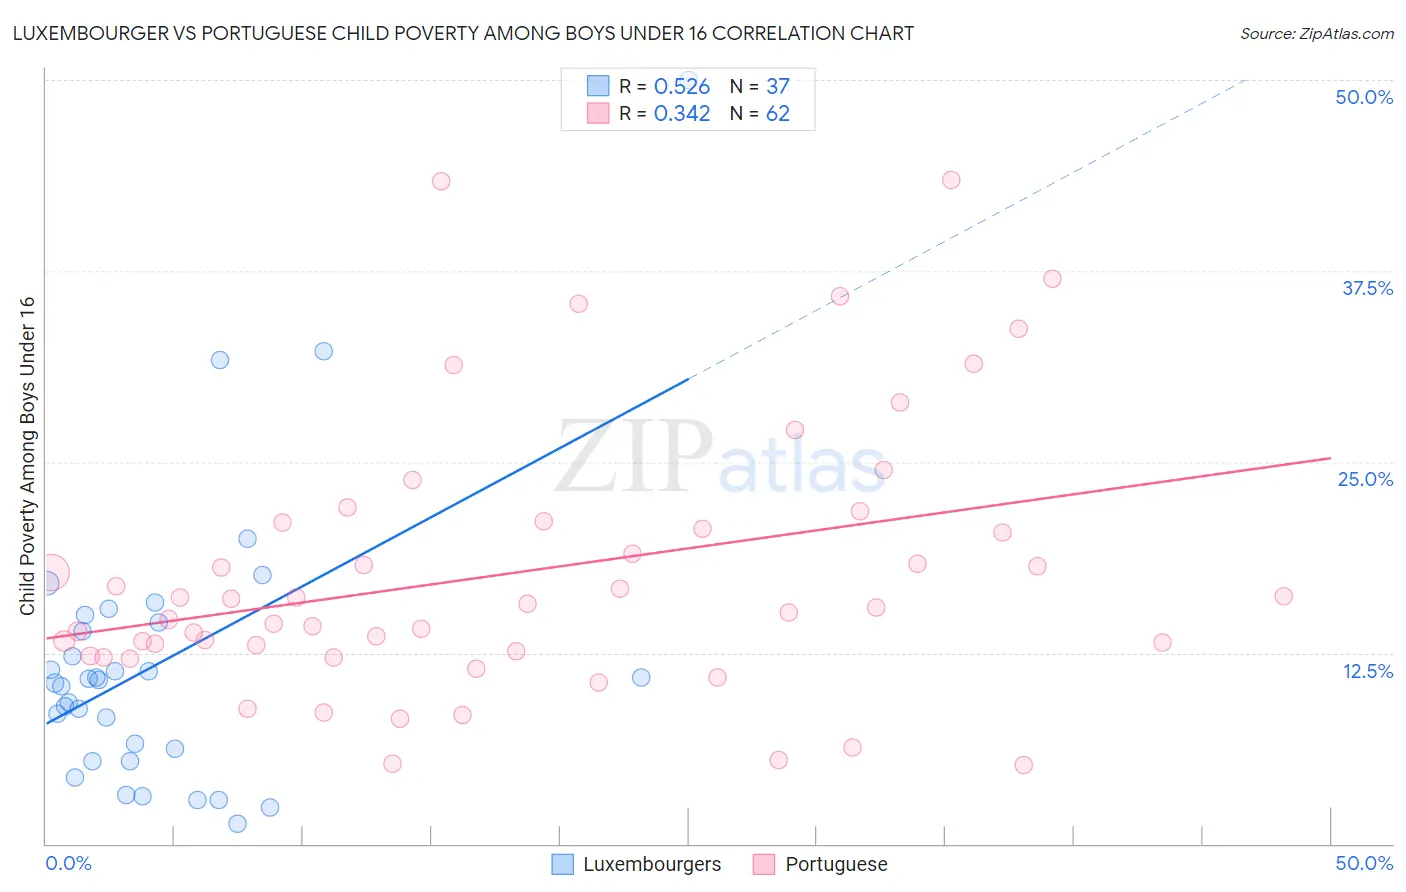 Luxembourger vs Portuguese Child Poverty Among Boys Under 16